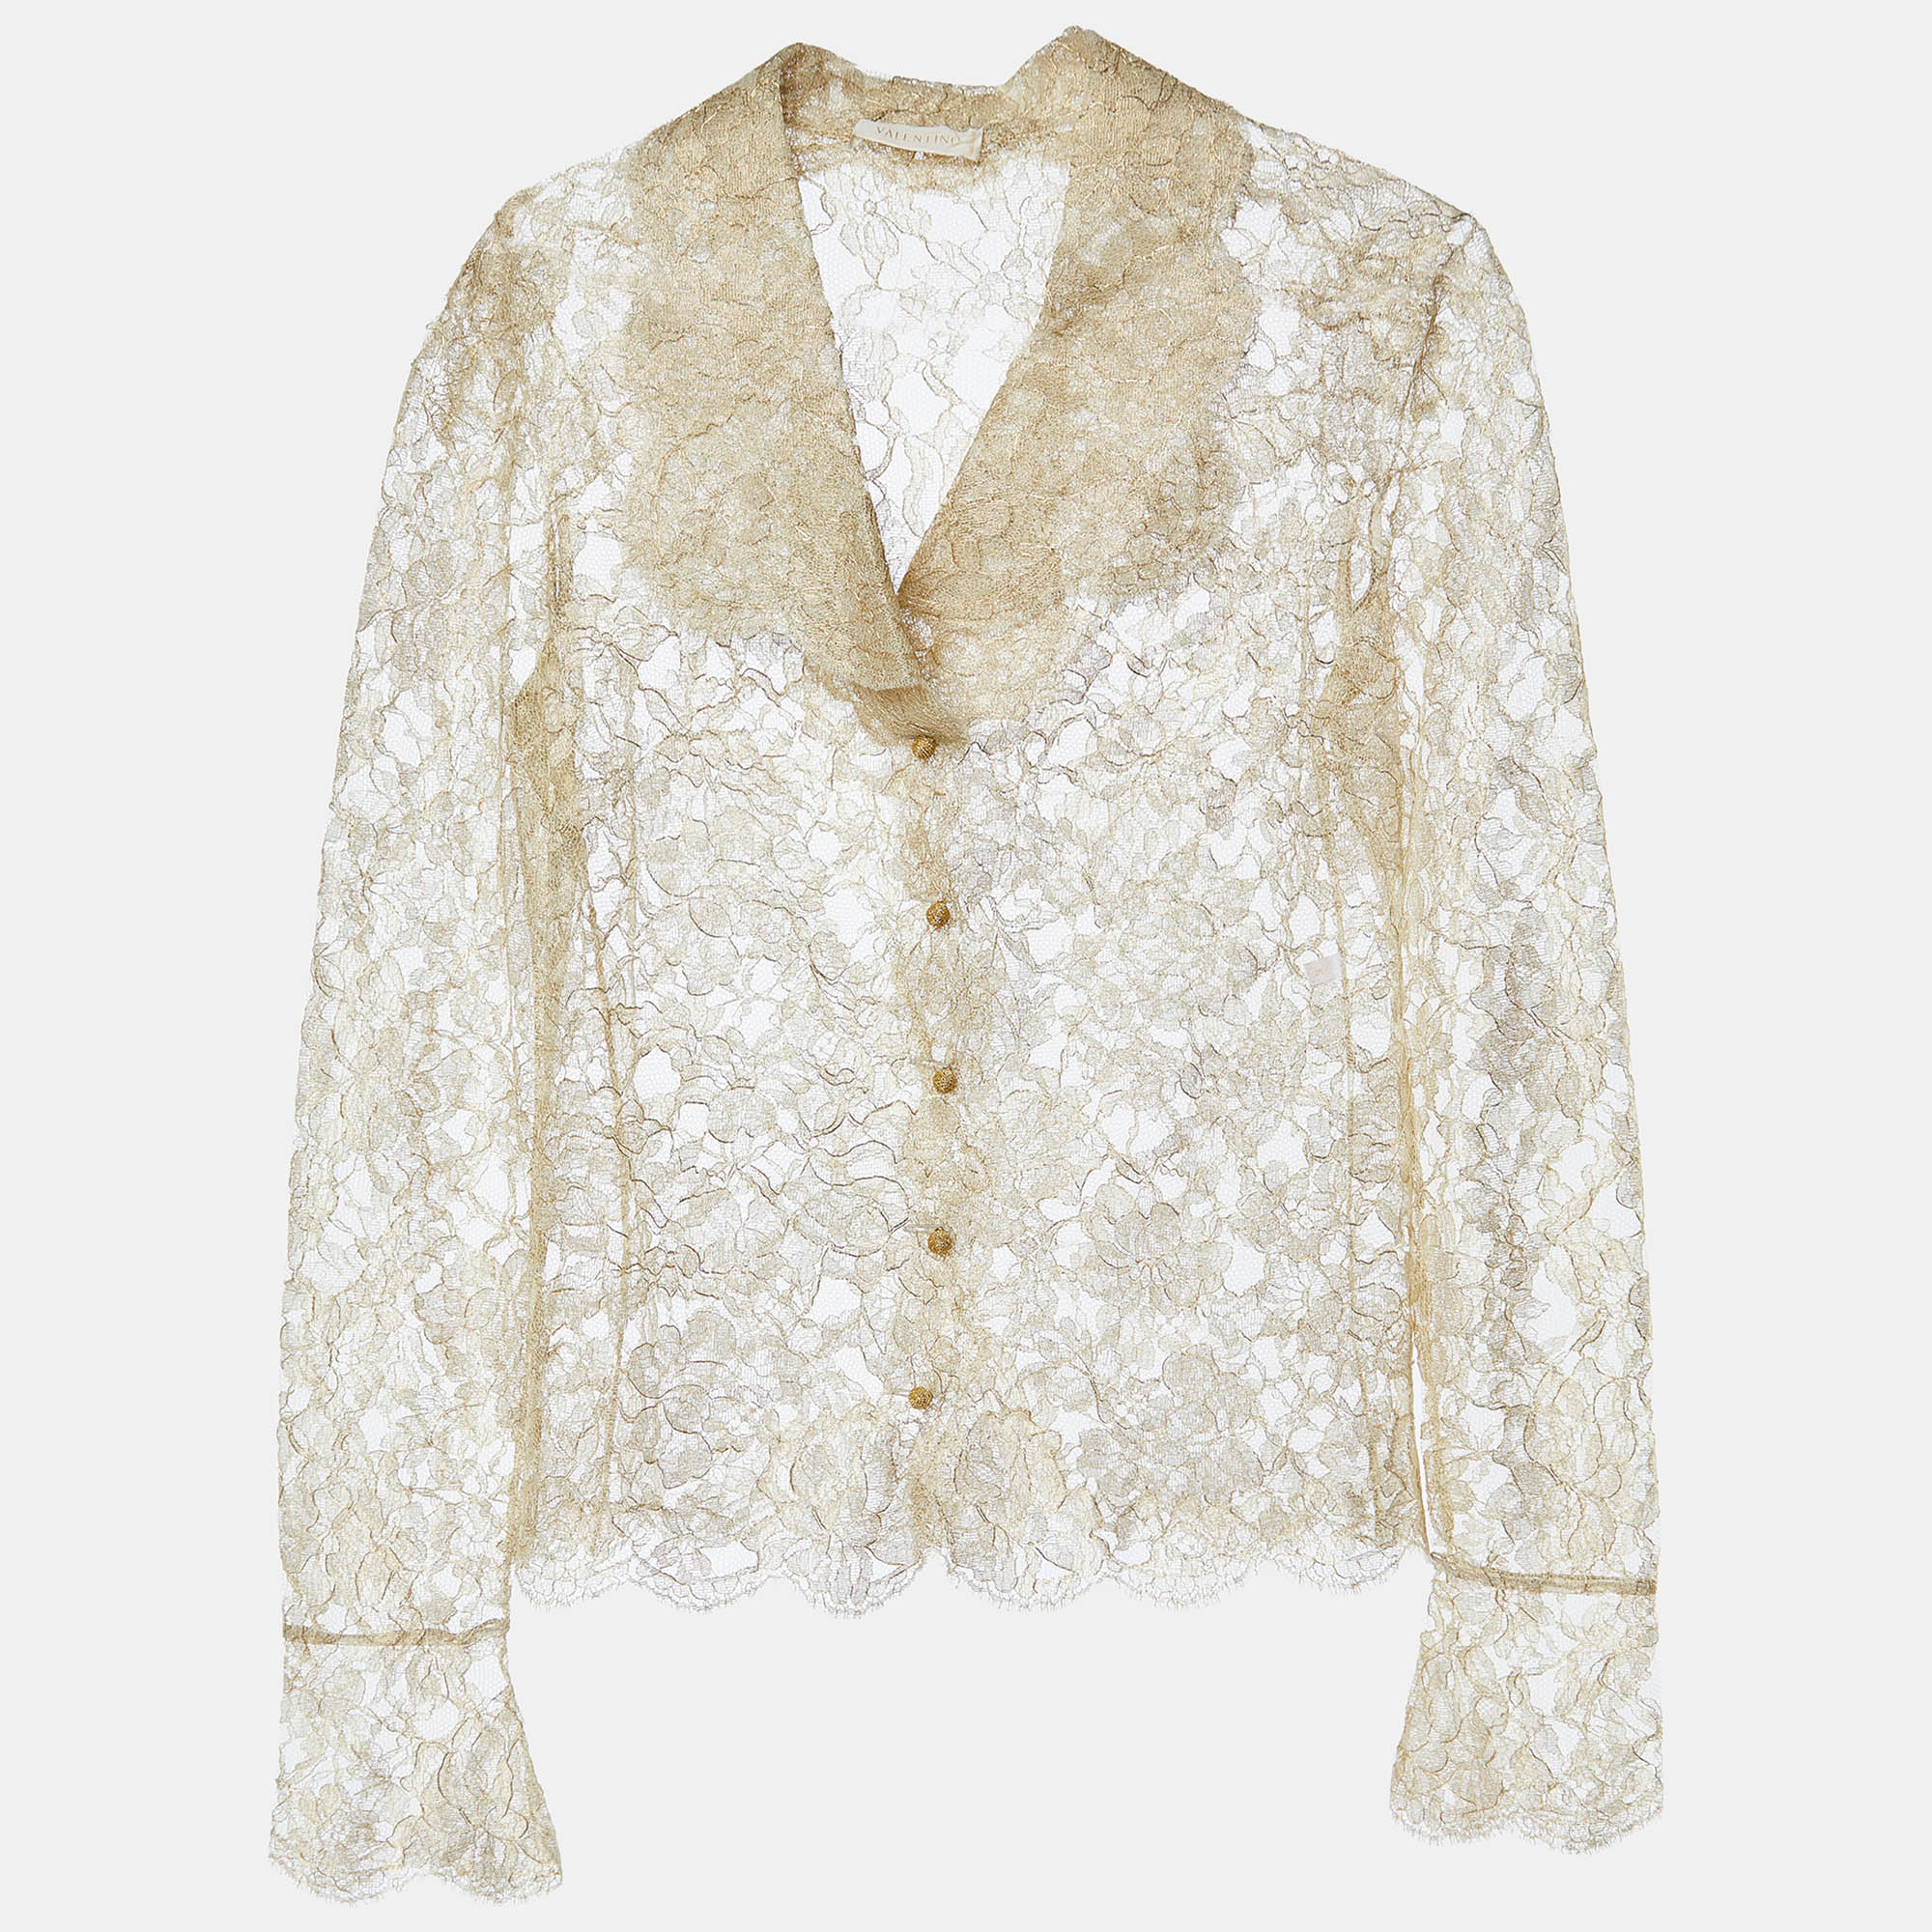 Valentino Gold Floral Lace Buttoned Lace Blouse M